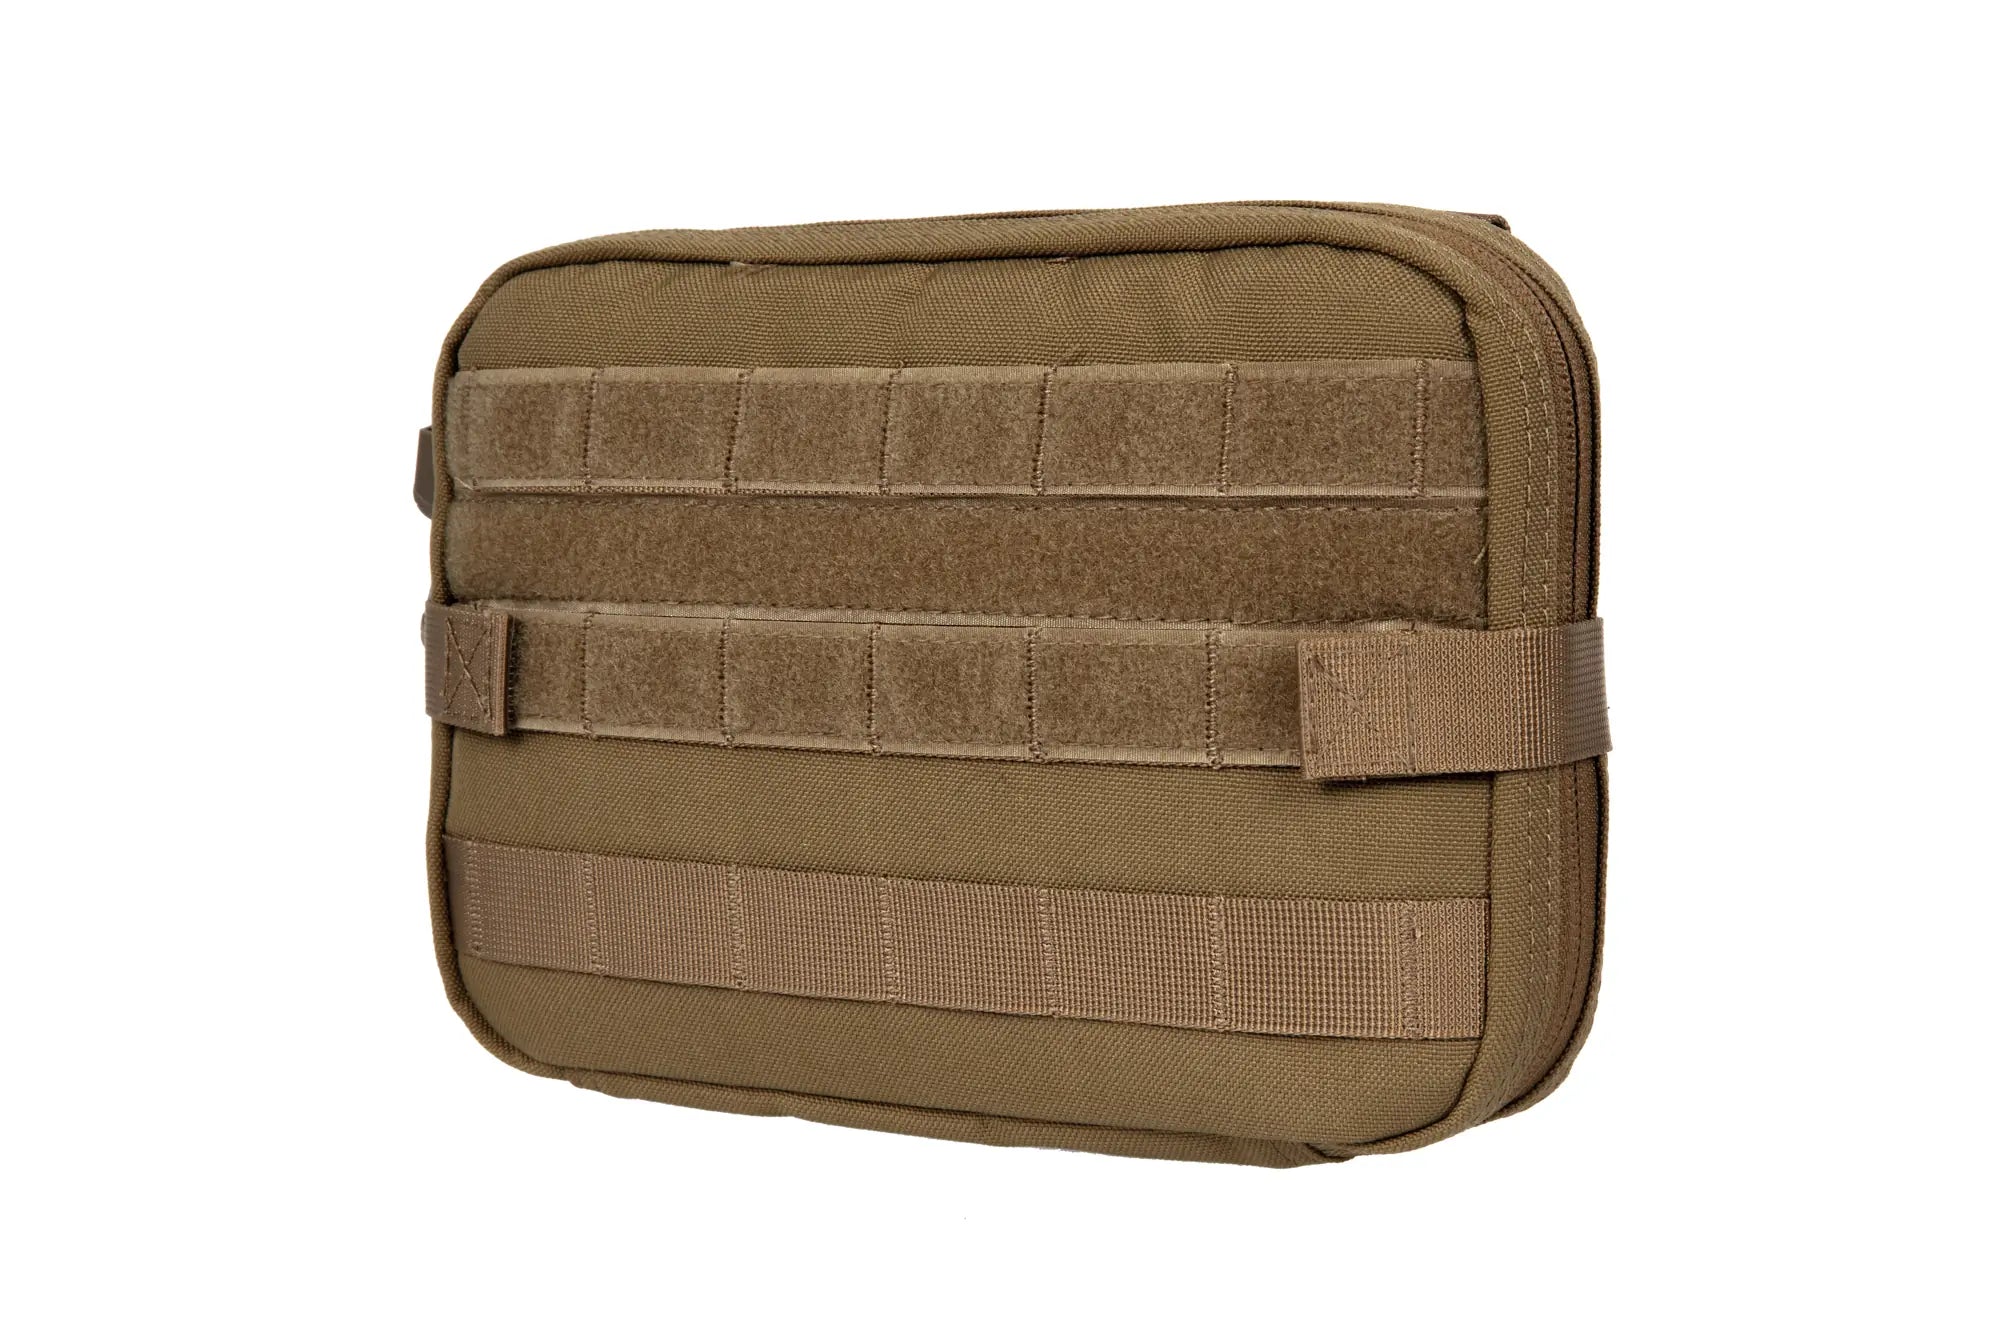 Large Administration Pouch with a Map Holder - Tan